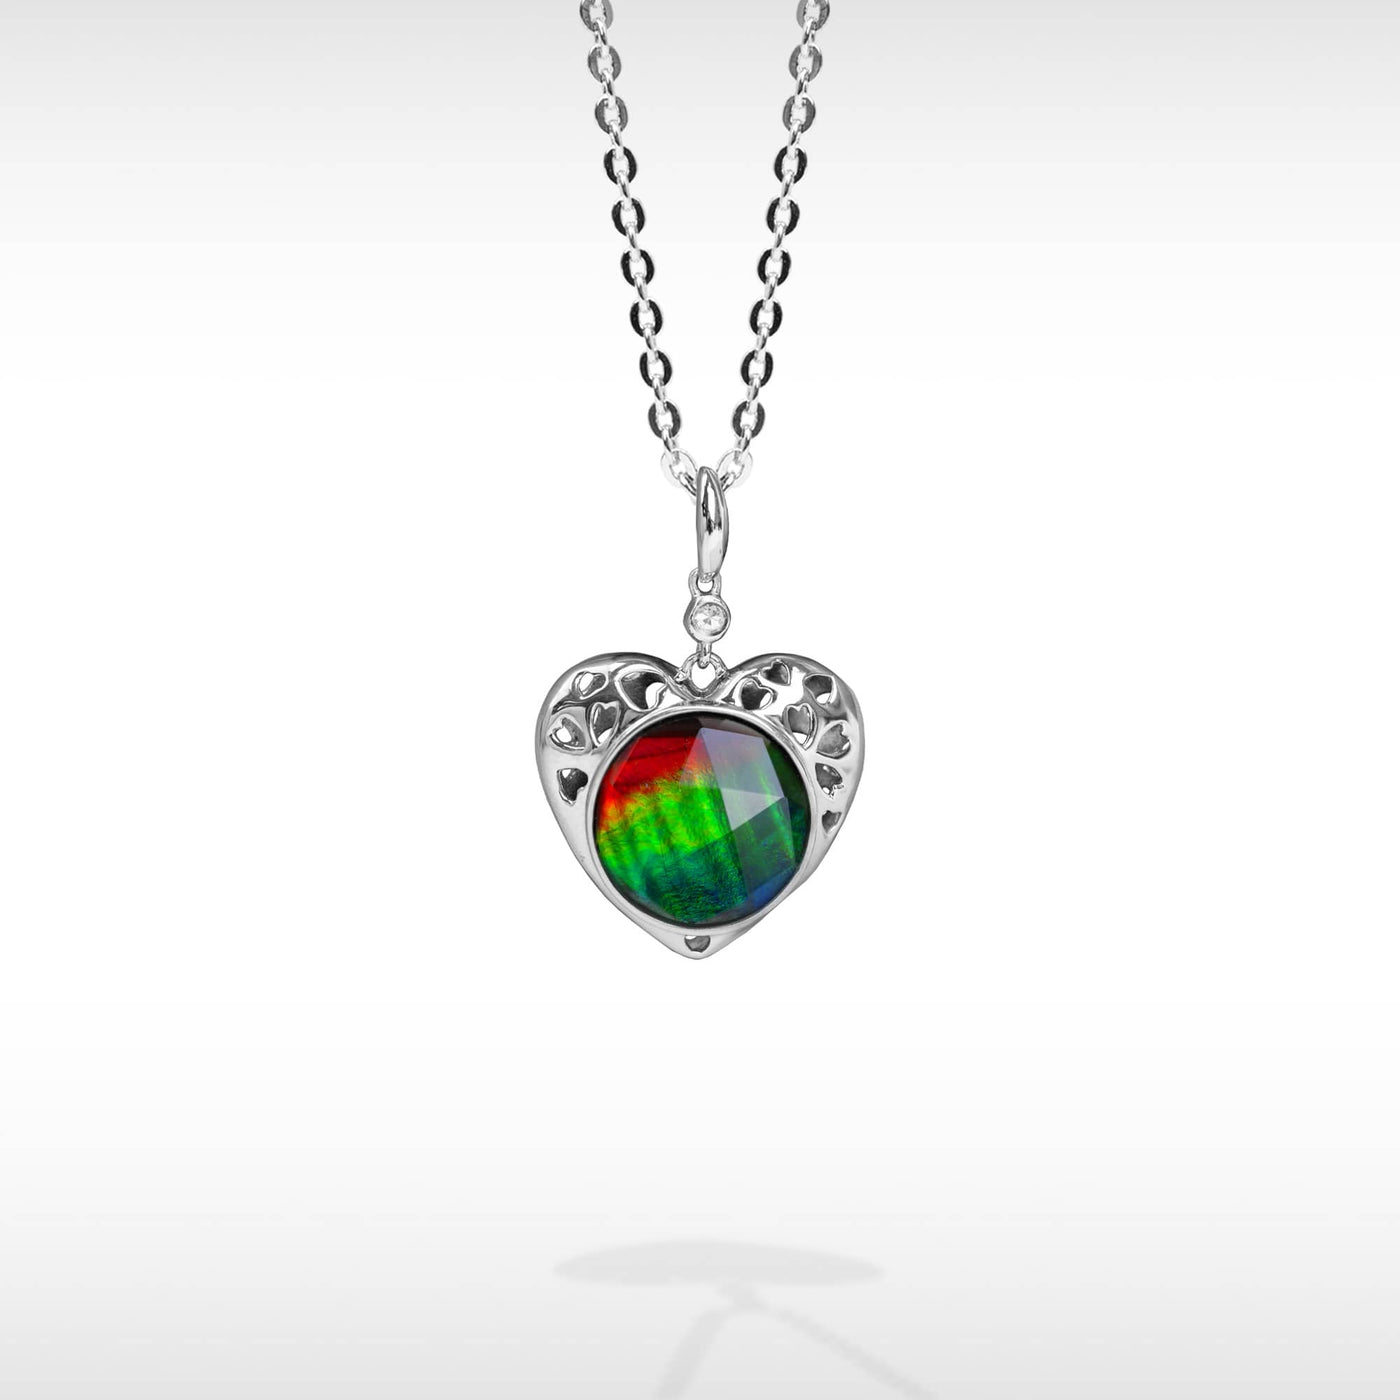 Women's Sterling Silver Ammolite Pendant with White Sapphire Accent